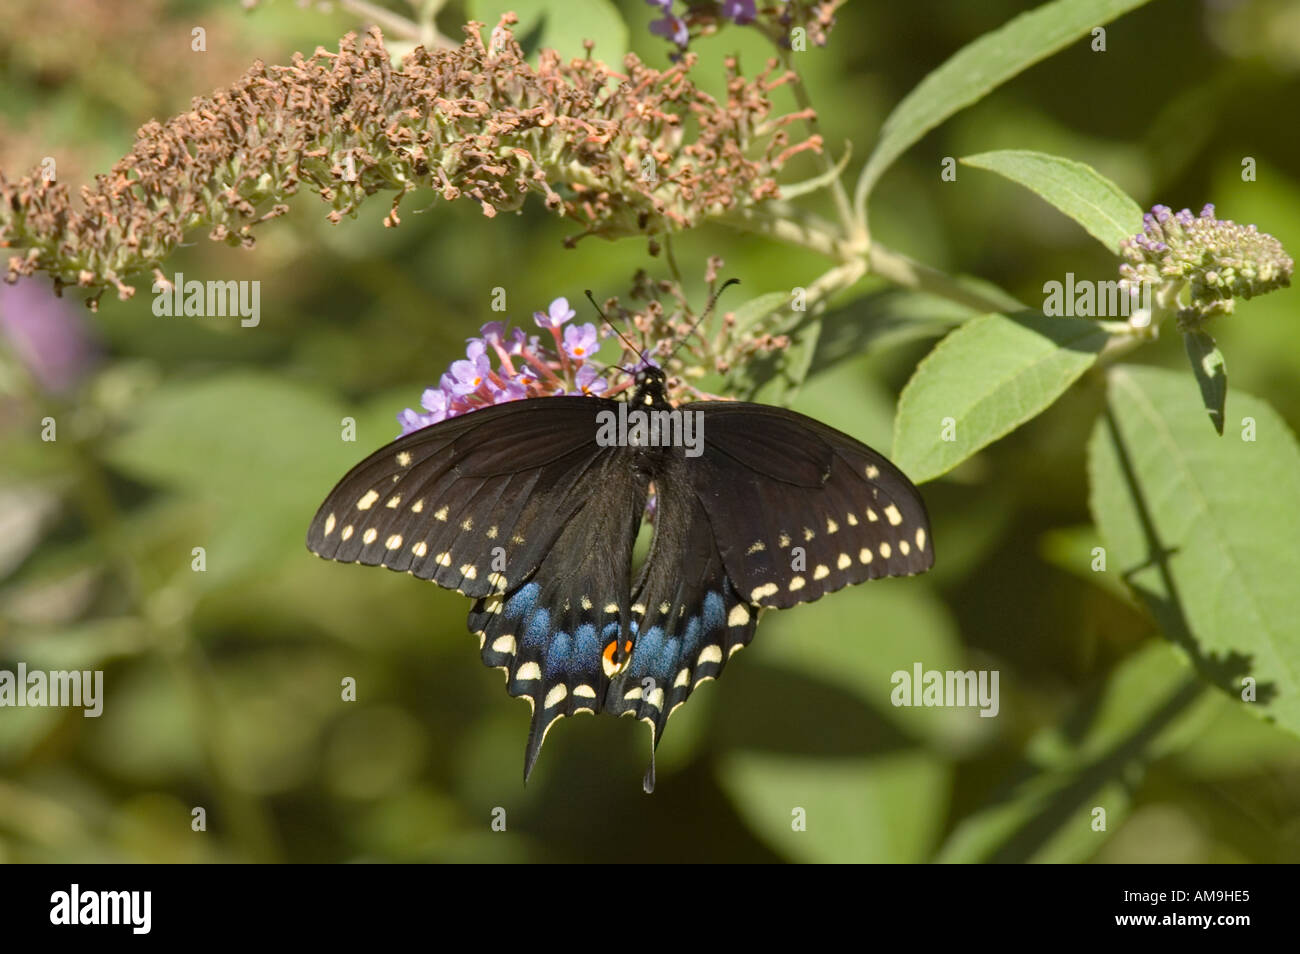 Eastern black swallowtail butterfly nectaring on a Butterfly Bush flower. Stock Photo